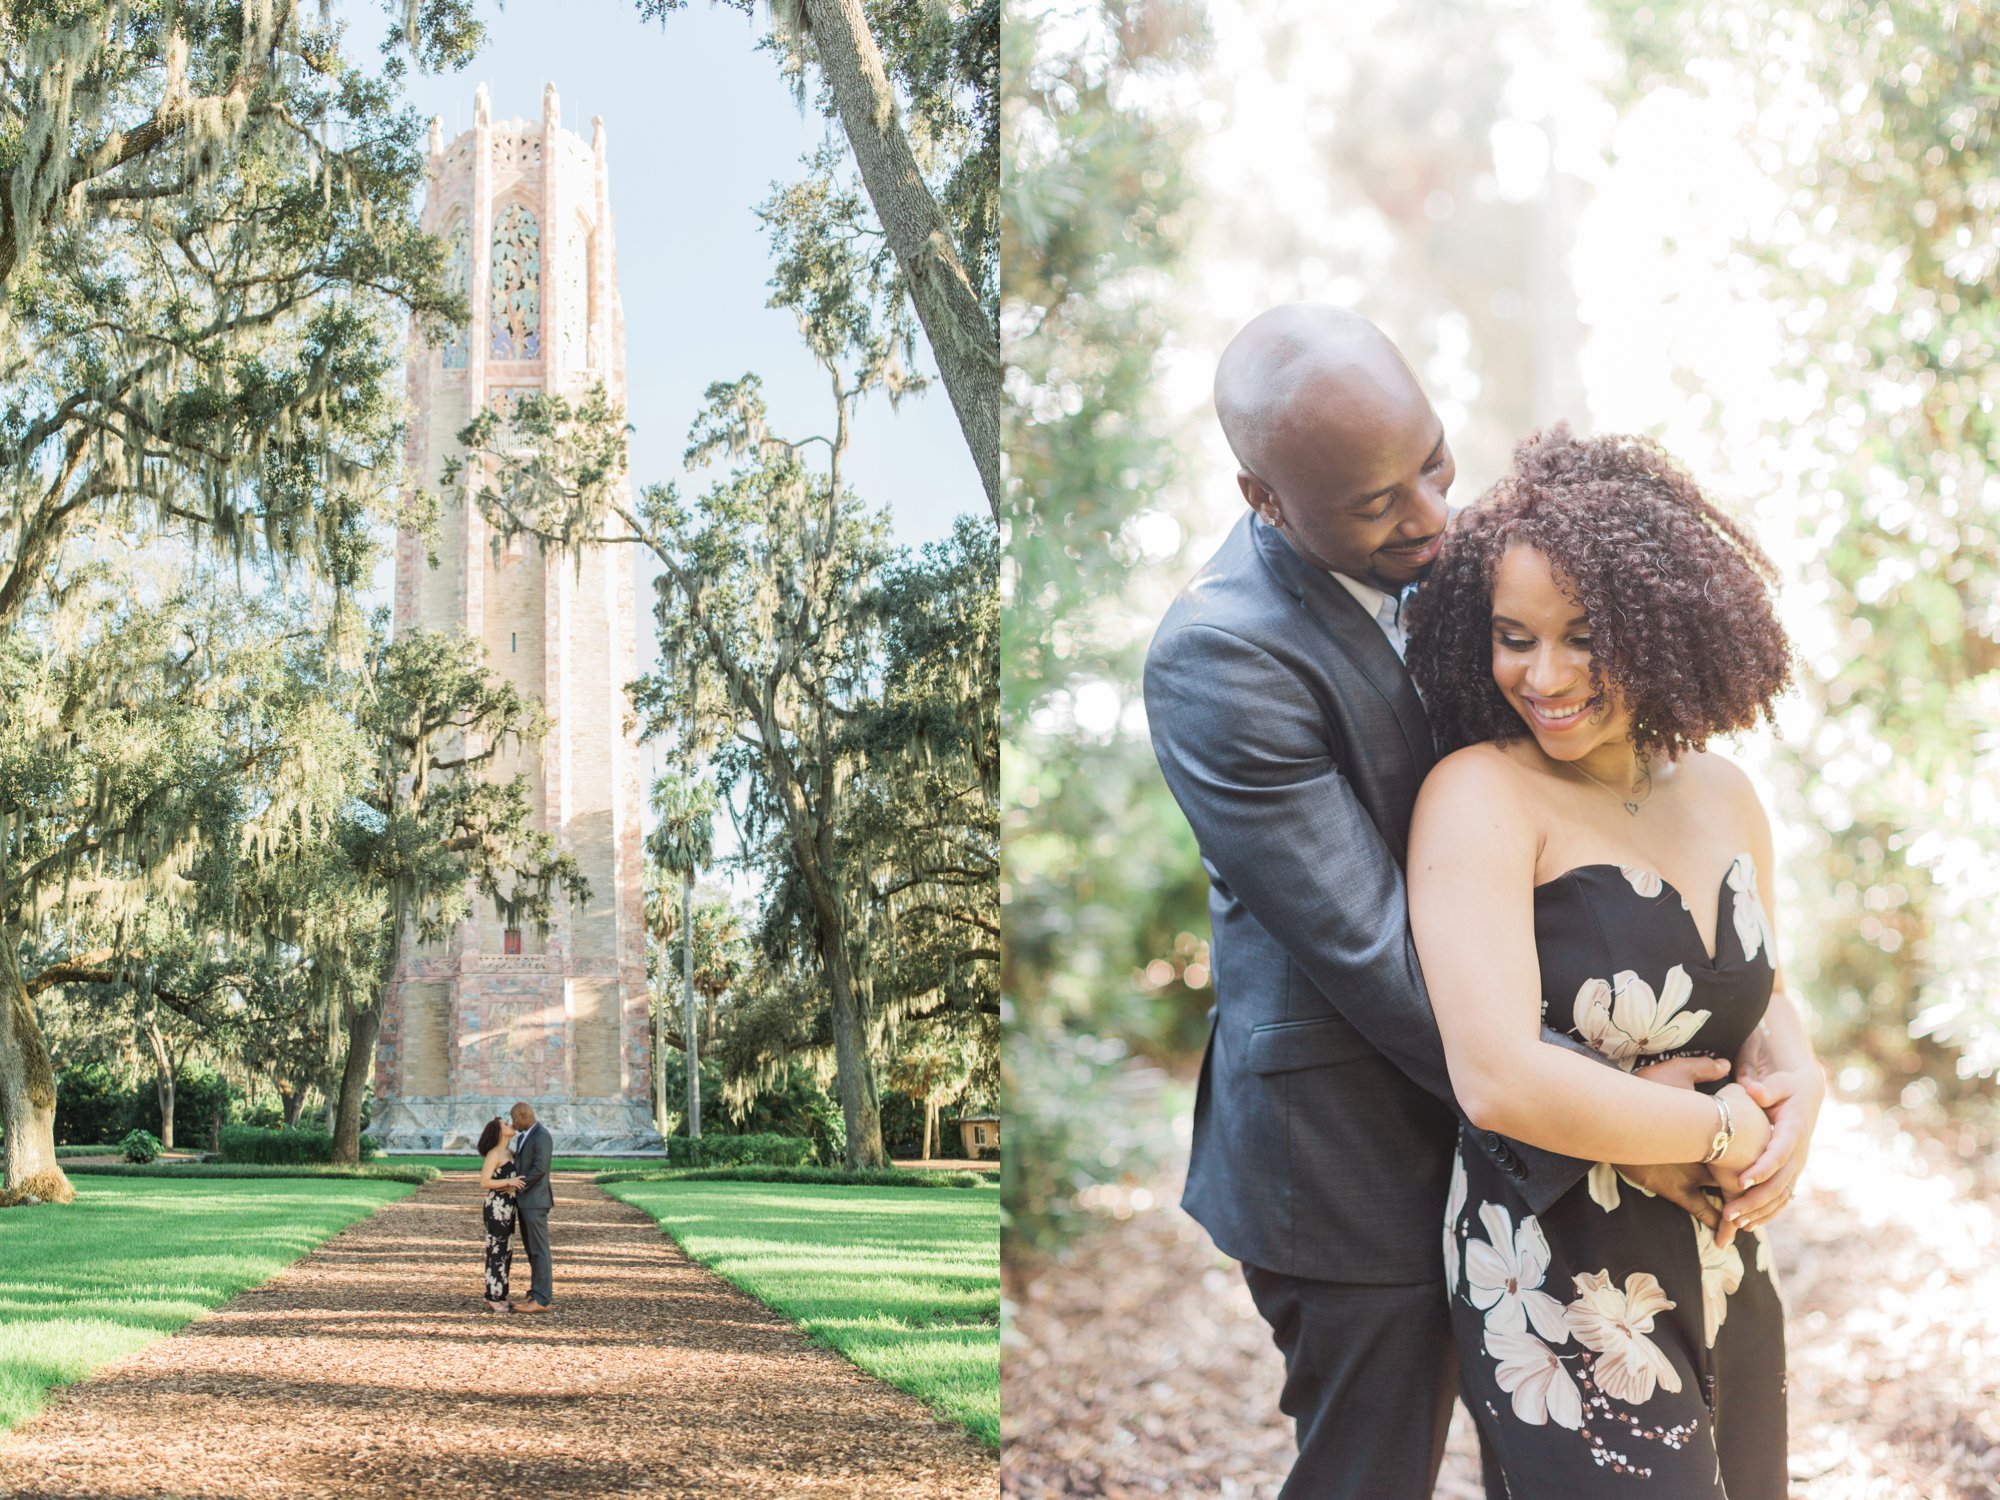 bok tower gardens engagement session, bok tower gardens, bok tower garden wedding